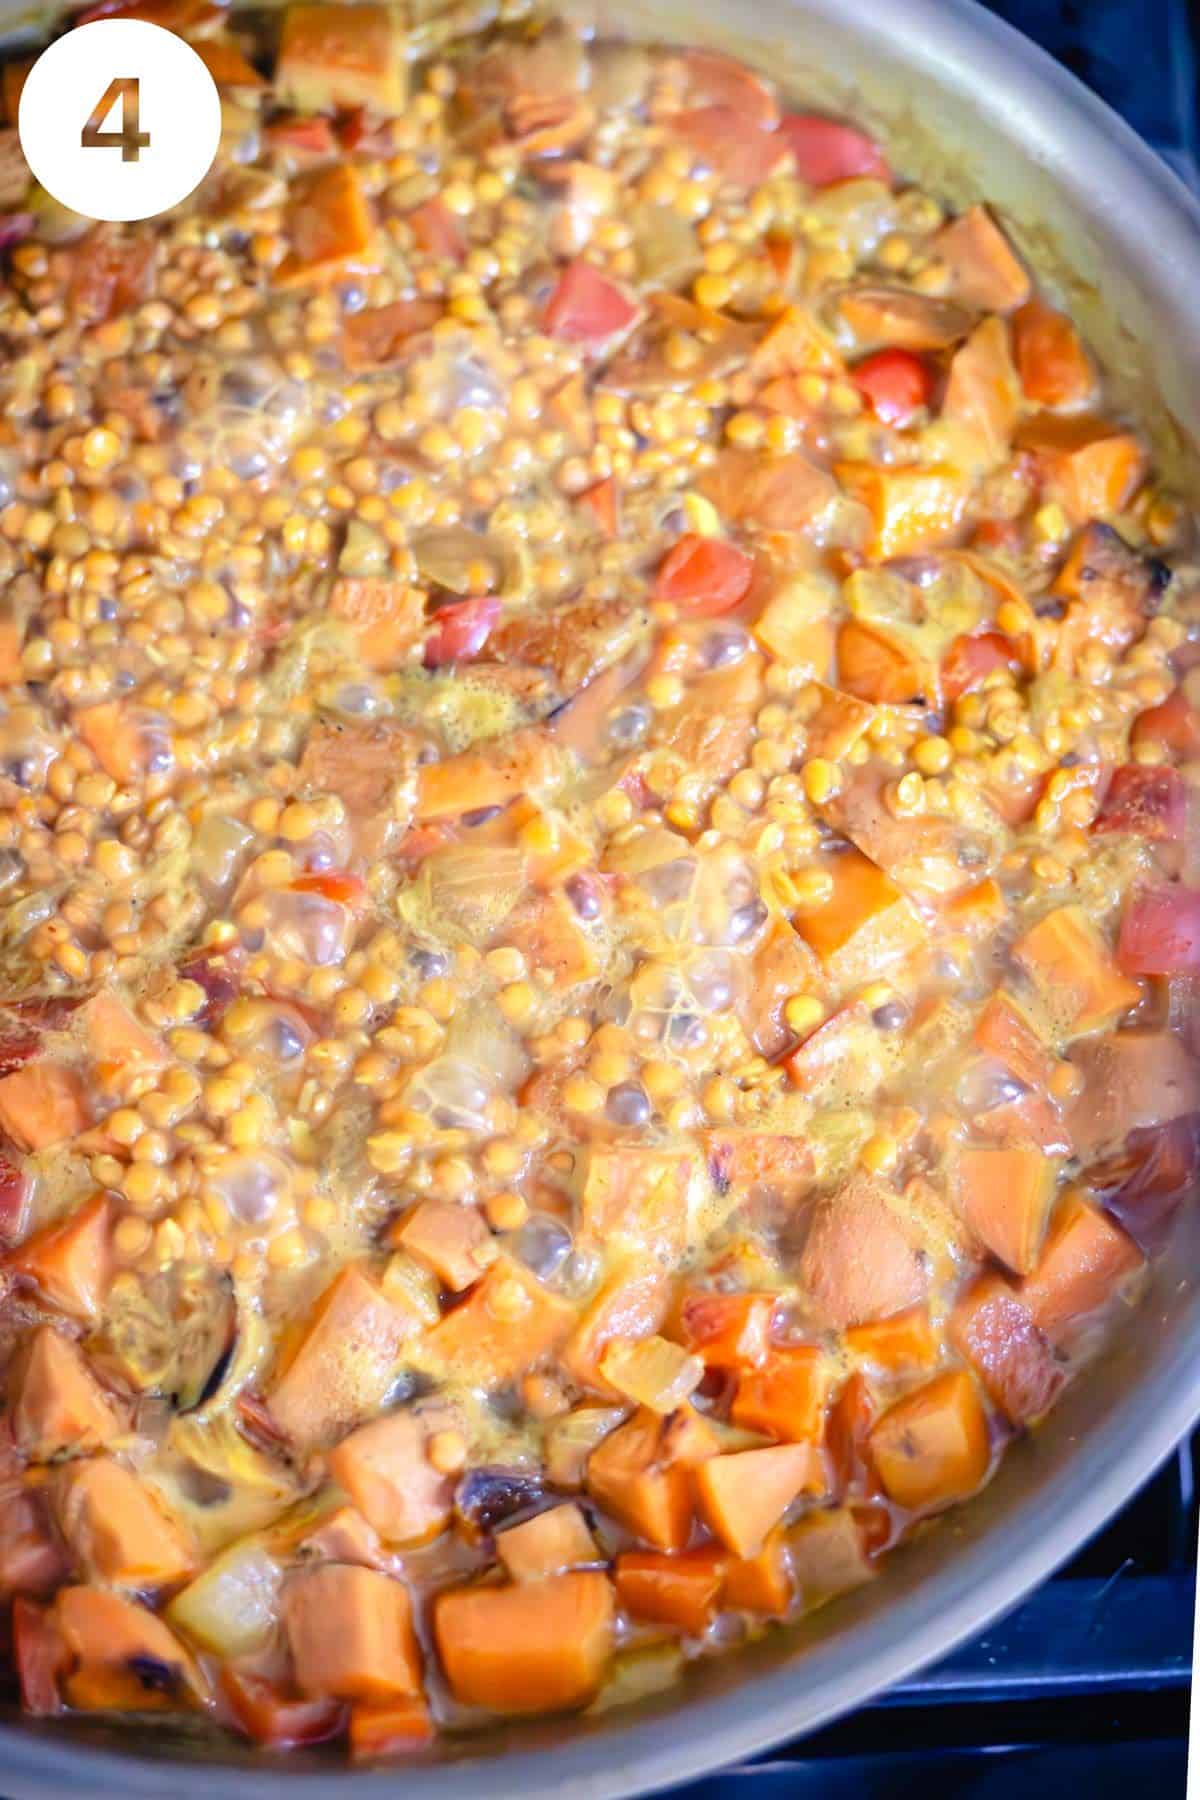 Lentils cooking in water in a skillet with vegetables and spices. The photo is labeled with a number "4."